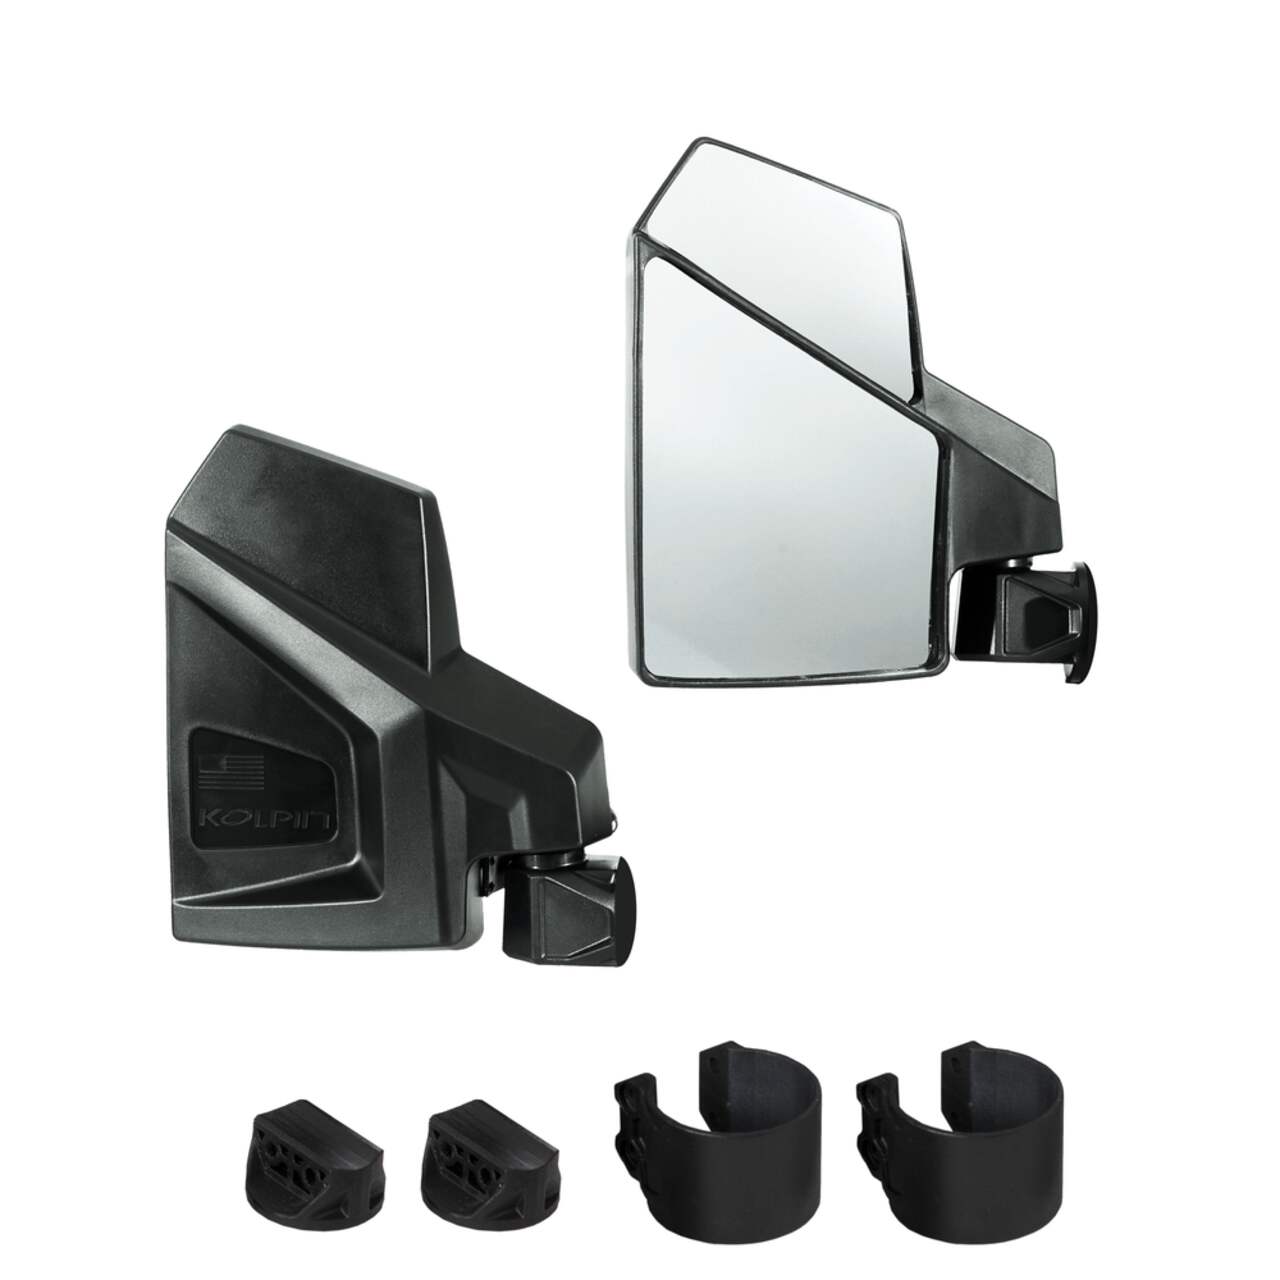 https://media-www.canadiantire.ca/product/automotive/automotive-outdoor-adventure/powersport/1279206/utv-side-mirror-pair-5dcfe336-fc12-4fc4-994f-166260e089d3.png?imdensity=1&imwidth=640&impolicy=mZoom